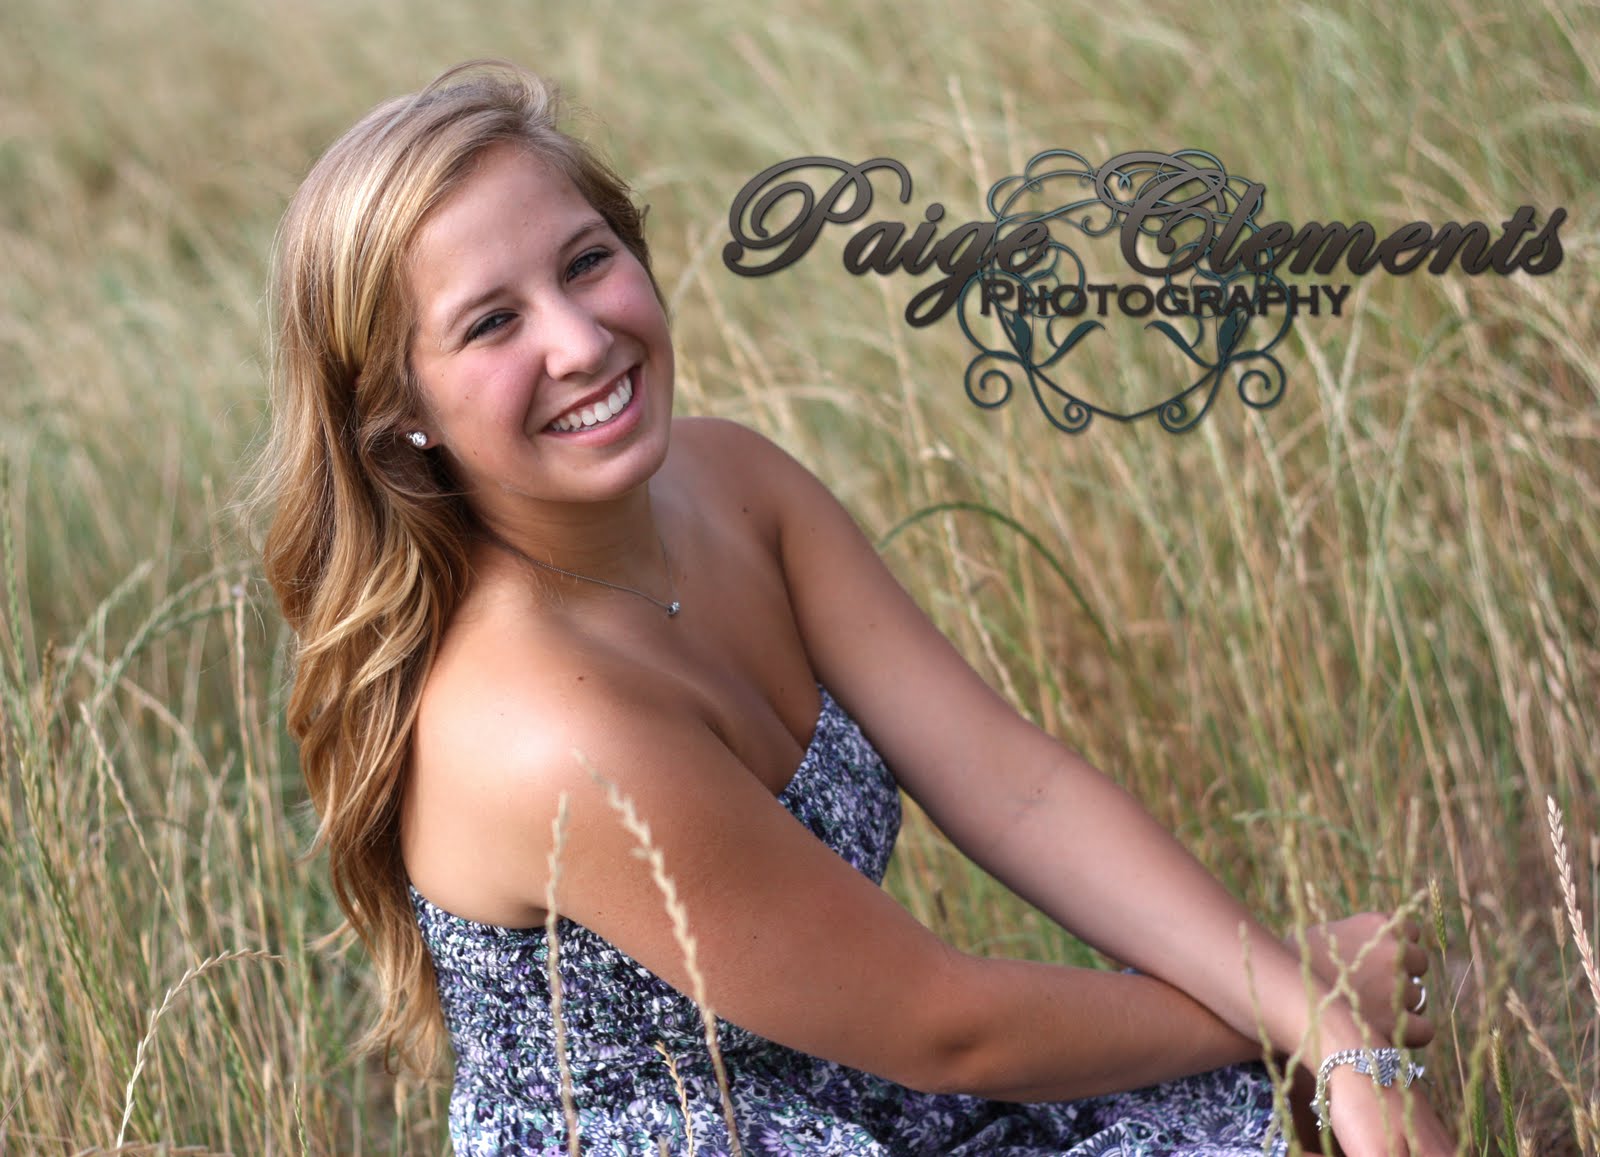 Paige Clements Photography